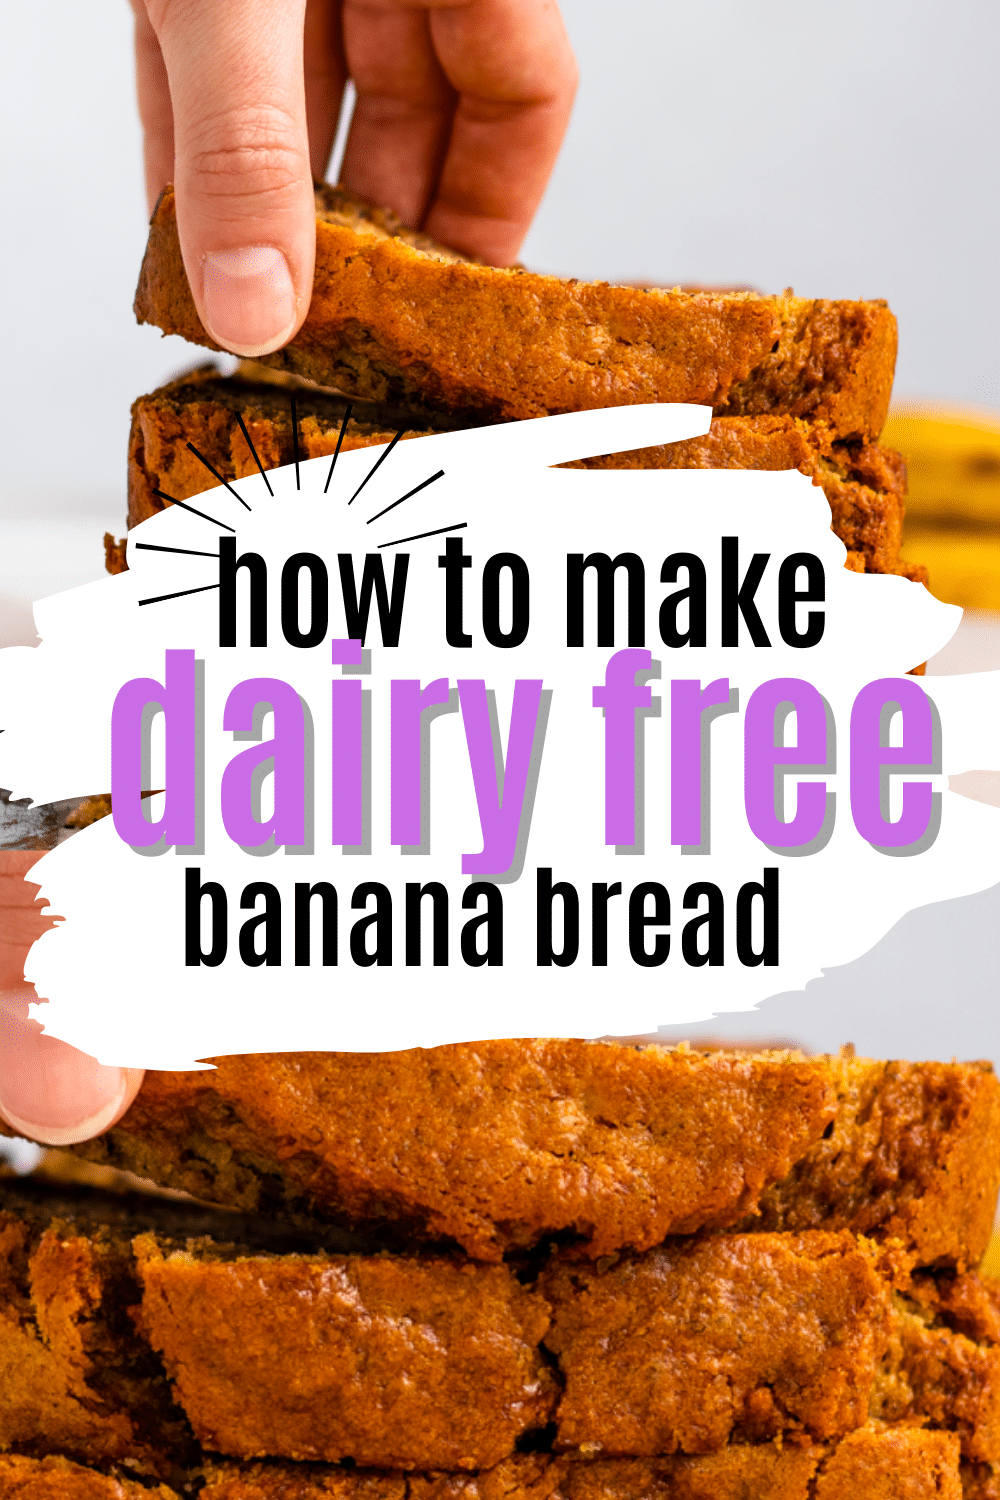 This dairy free banana bread is a dairy-free twist of the classic. You will not miss dairy in this recipe, it is the perfect blend of moist but not too dense! Our dairy free banana bread is also gluten-free and vegan!